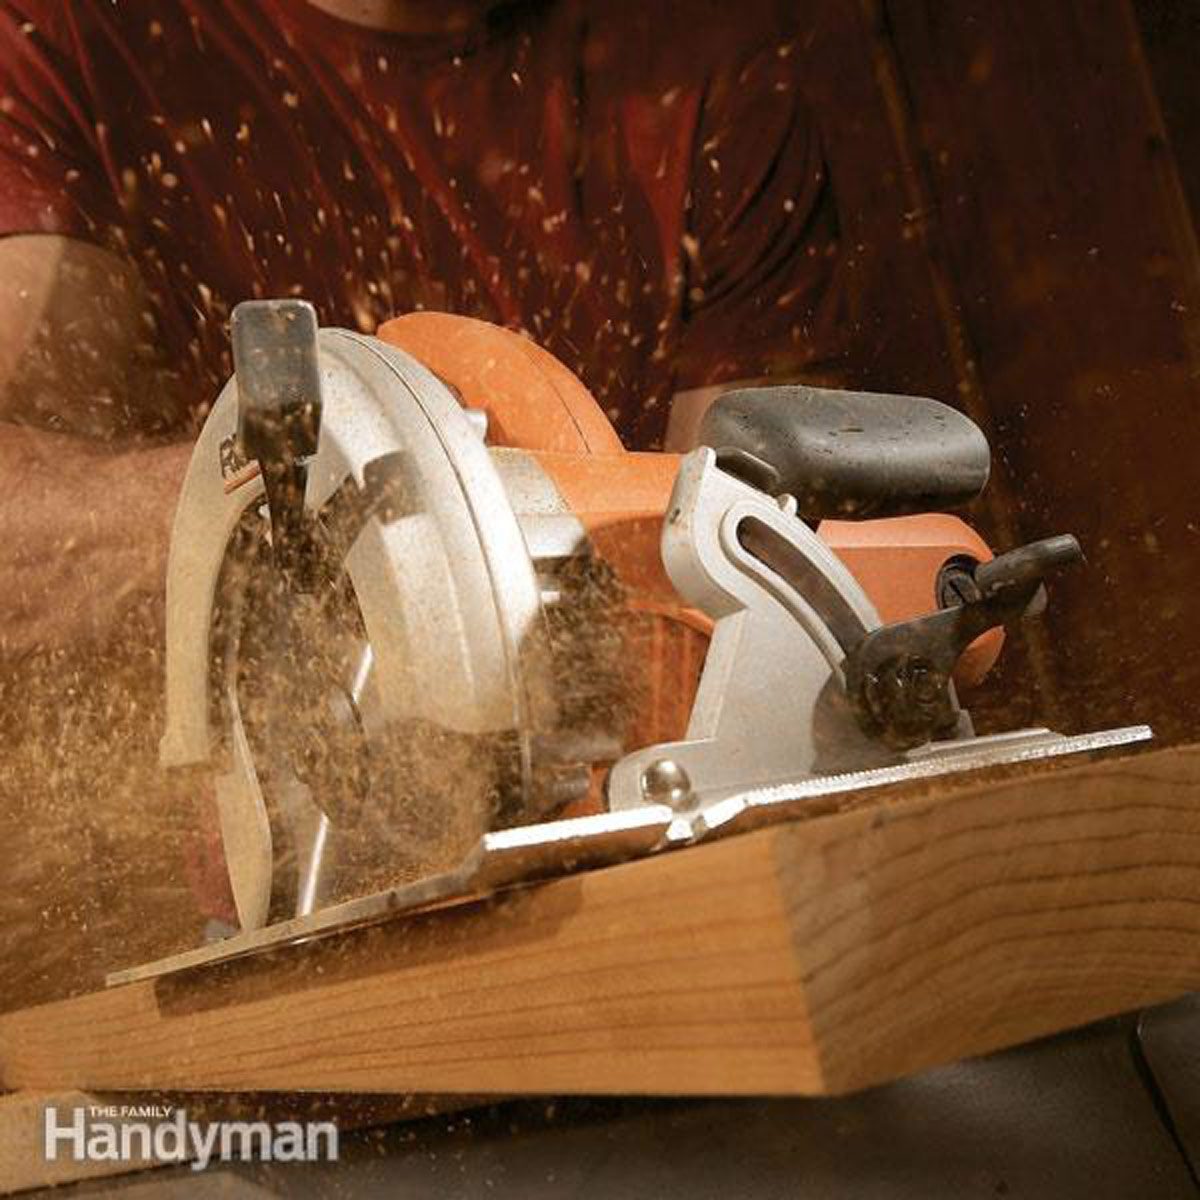 25 Measuring Hacks All Diyers Should Know The Family Handyman